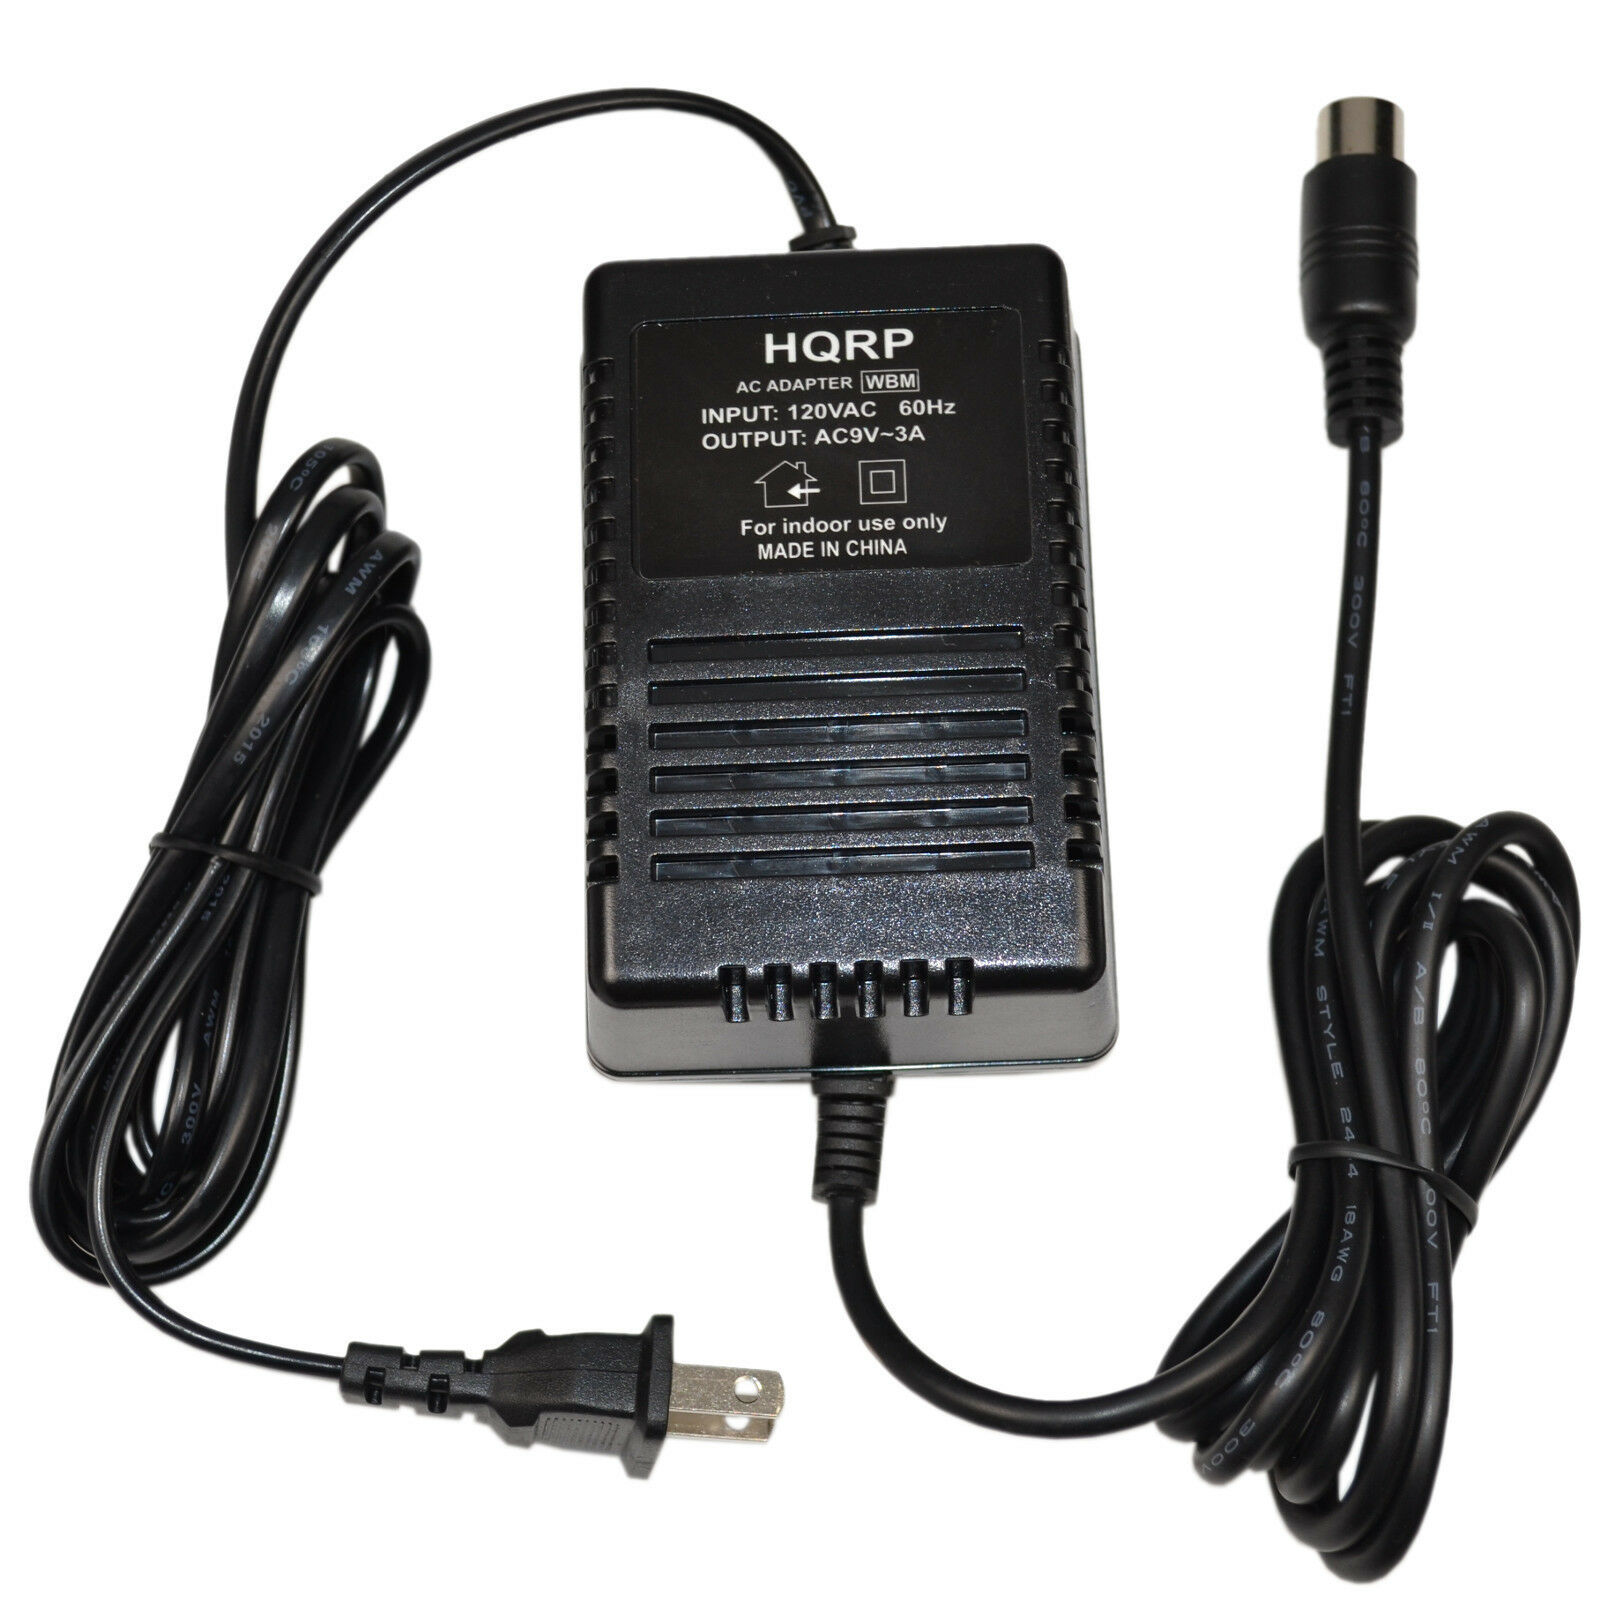 Power Supply AC Adapter for Korg Triton / Tr / Karma / N5EX / N1 KA163E Compatible Brand: For Korg Suited For: Power